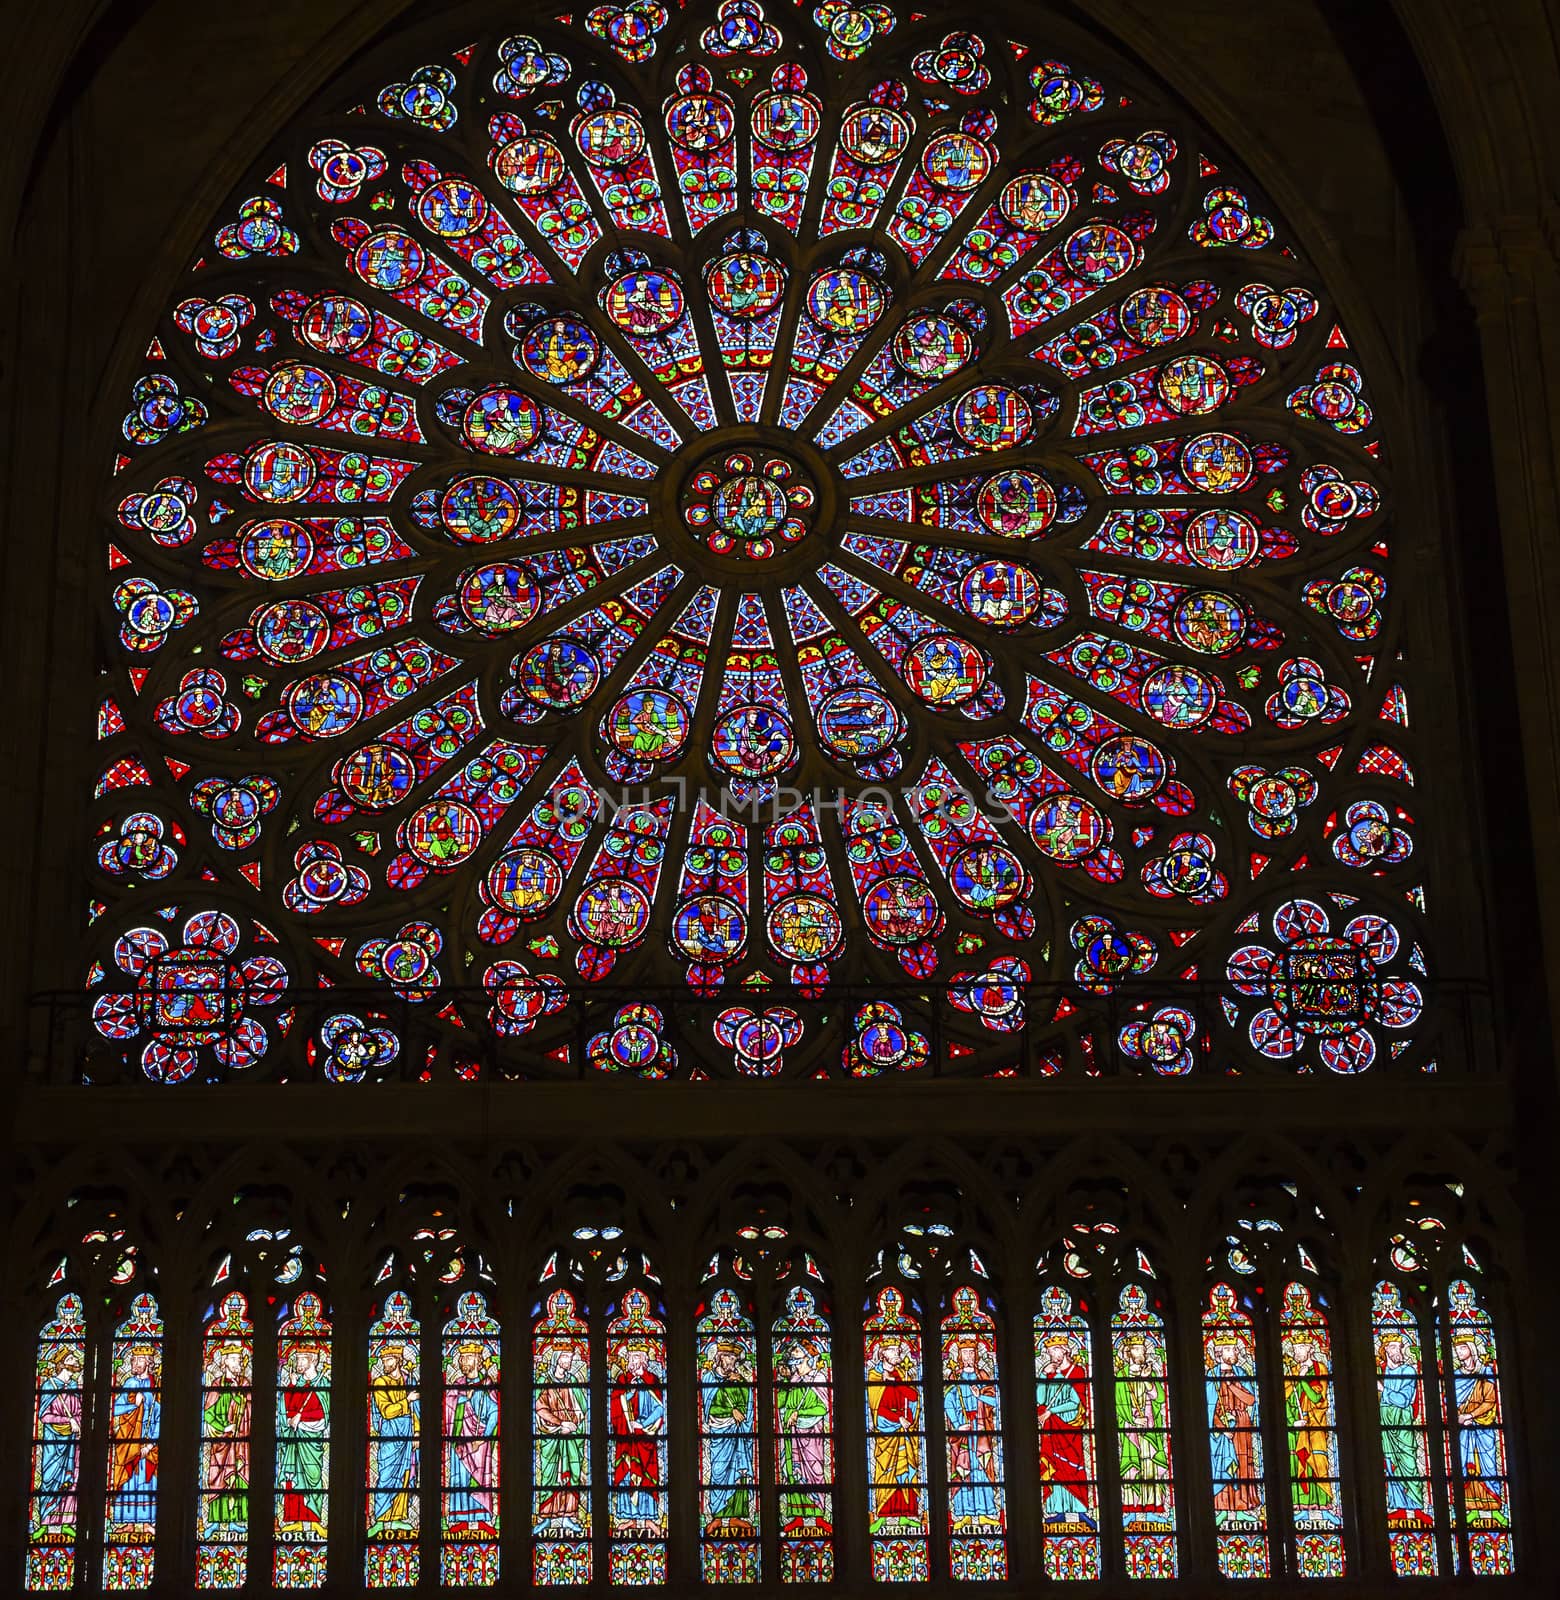 North Rose Window Virgin Mary Jesus Disciples Stained Glass Notre Dame Cathedral Paris France.  Notre Dame was built between 1163 and 1250 AD.  Virgin Mary Rose Window oldest in Notre Dame from 1250.